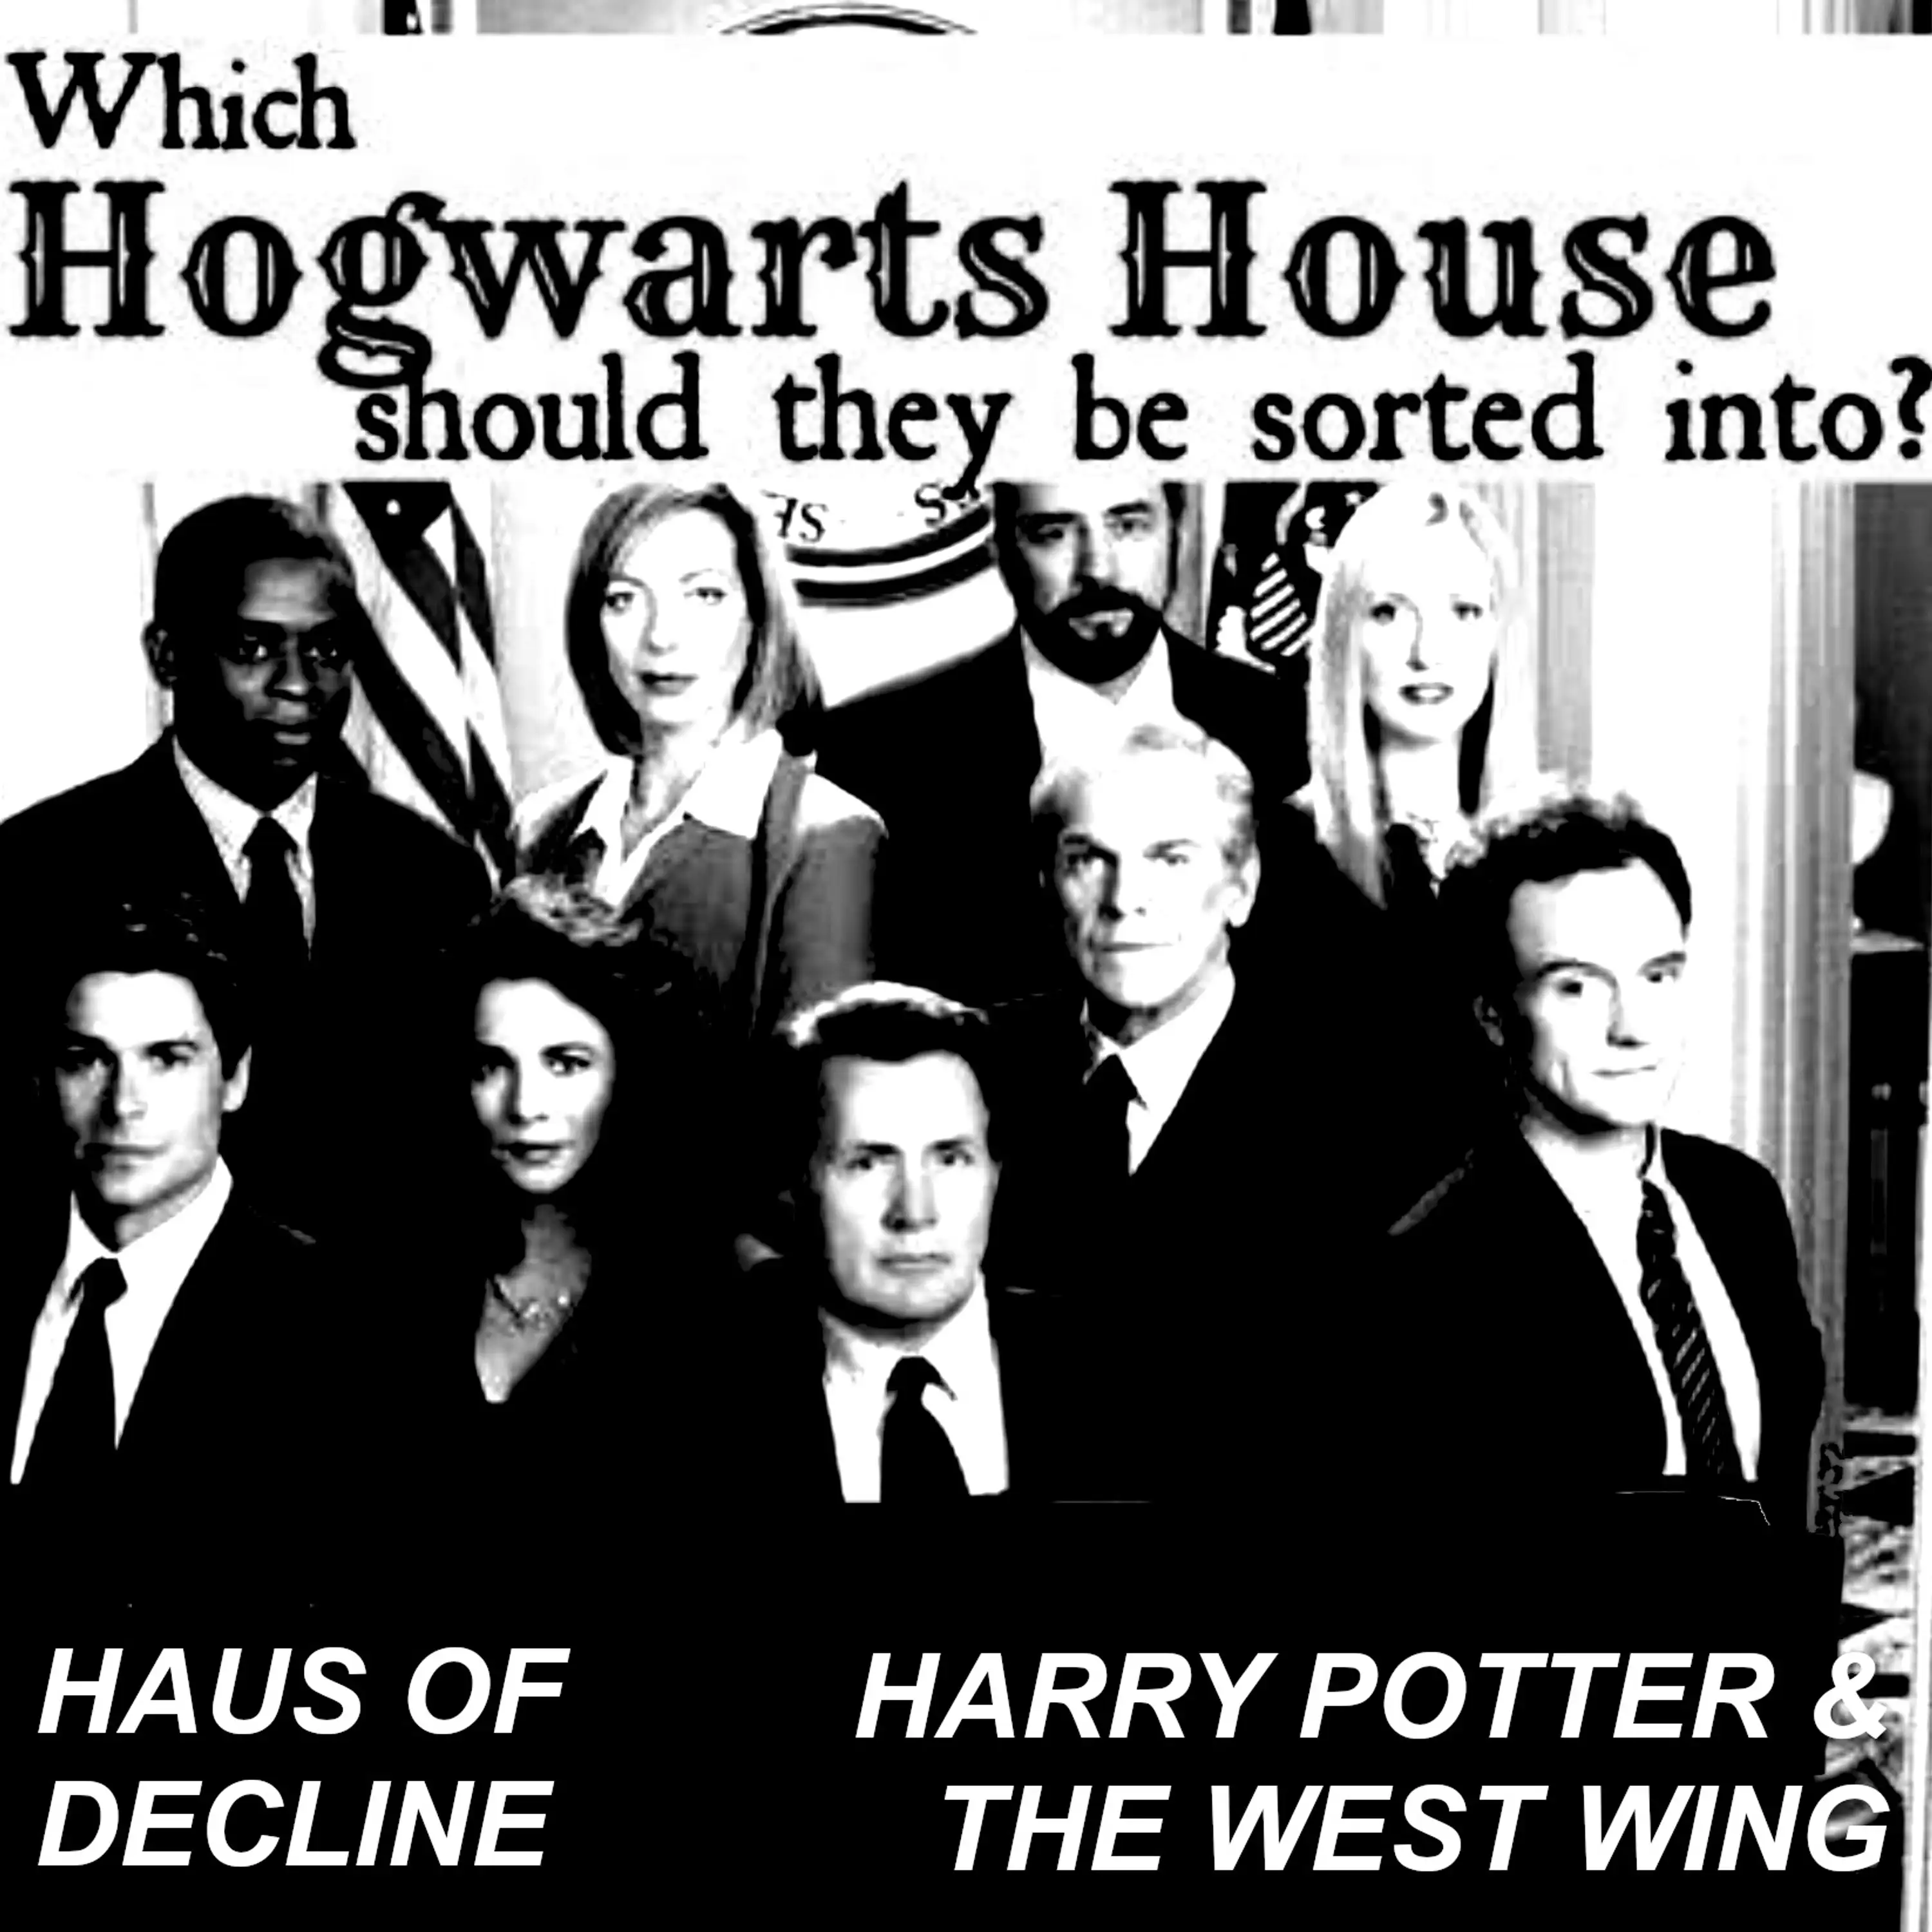 Harry Potter and the West Wing